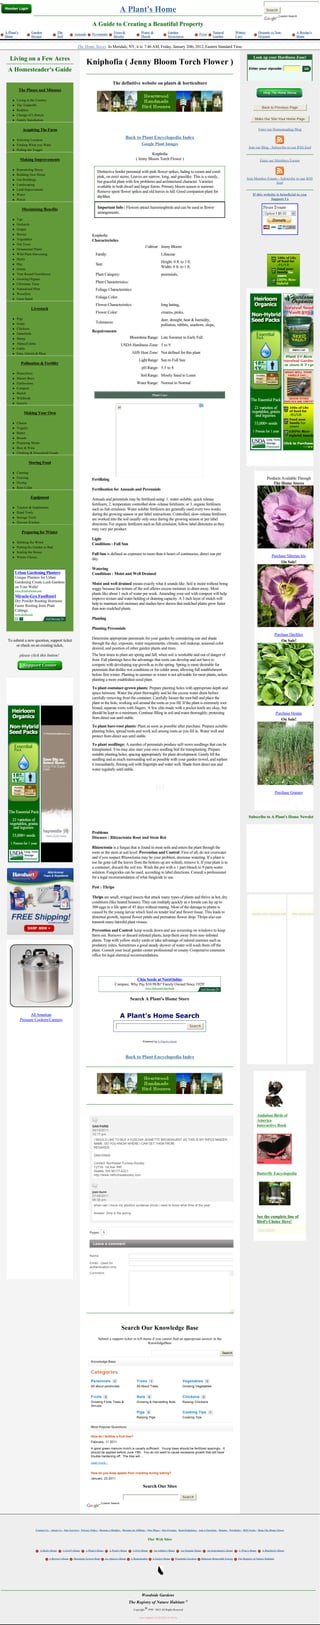 A Plant's Home                                                                                                                Search
                                                                                                                                                                                                                                               Custom Search


                                                                            A Guide to Creating a Beautiful Property
A Plant's            Garden                  The                                                 Trees &               Water &                      Garden                                 Natural        Winter            Organic vs Non-                A Recipe's
                                                          Annuals           Perennials                                                                                     Pests
Home                 Design                  Soil                                                Shrubs                Marsh                        Structures                             Garden         Care              Organic                        Home


                                                            The Home Stores In Meridale, NY, it is: 7:46 AM, Friday, January 20th, 2012, Eastern Standard Time.

   Living on a Few Acres                                                                                                                                                                                                Look up your Hardiness Zone!
                                                                    Kniphofia ( Jenny Bloom Torch Flower )
  A Homesteader's Guide                                                                                                                                                                                             Enter your zipcode:                          



                                                                                                The definitive website on plants & horticulture                                                                               Trees at Arborday.org

            The Pluses and Minuses

     l    Living in the Country
     l    The Tradeoffs
                                                                                                                                                                                                                               Back to Previous Page
     l    Realities
     l    Change of Lifestyle
     l    Family Satisfaction                                                                                                                                                                                            Make Our Site Your Home Page


              Acquiring The Farm                                                                                                                                                                                            Enter our Homesteading Blog

     l    Selecting Location
                                                                                                           Back to Plant Encyclopedia Index
     l    Finding What you Want                                                                                        Google Plant Images
                                                                                                                                                                                                                    Join our Blog - Subscribe to our RSS feed
     l    Pulling the Trigger
                                                                                                                             Kniphofia
            Making Improvements                                                                                    ( Jenny Bloom Torch Flower )                                                                              Enter our Members Forum

     l    Remodeling House
                                                                               Distinctive border perennial with pink flower spikes, fading to cream and coral-
     l    Building New House
                                                                               pink, on erect stems. Leaves are narrow, long, and grasslike. This is a sturdy,                                                     Join Member Forum - Subscribe to our RSS
     l    Out Buildings
                                                                               but graceful plant with few problems and architectural character. Varieties                                                                          feed
     l    Landscaping
                                                                               available in both dwarf and larger forms. Primary bloom season is summer.
     l    Land Improvement
                                                                               Remove spent flower spikes and old leaves in fall. Good companion plant for
     l    Water                                                                                                                                                                                                        If this website is beneficial to you
                                                                               daylilies.
     l    Power                                                                                                                                                                                                                    Support Us

              Maximizing Benefits                                              Important Info : Flowers attract hummingbirds and can be used in flower
                                                                               arrangements.
     l    Tips
     l    Orchards
     l    Grapes
     l    Berries                                                           Kniphofia
     l    Vegetables                                                        Characteristics
     l    Nut Trees
                                                                                                                             Cultivar: Jenny Bloom  
     l    Ornamental Plants
     l    Wild Plant Harvesting                                               Family:                                                        Liliaceae  
     l    Herbs
                                                                                                                                             Height: 0 ft. to 3 ft.
     l    Hay                                                                 Size:
                                                                                                                                             Width: 0 ft. to 1 ft.  
     l    Grains
     l    Year Round Greenhouse                                               Plant Category:                                                perennials,  
     l    Growing Organic
     l    Christmas Trees
                                                                              Plant Characteristics:                                          
     l    Naturalized Plots                                                   Foliage Characteristics:                                        
     l    Woodlots
     l    Farm Stand                                                          Foliage Color:                                                  
                                                                              Flower Characteristics:                                        long lasting,  
                     Livestock
                                                                              Flower Color:                                                  creams, pinks,  
     l    Pigs                                                                                                                               deer, drought, heat & humidity,
     l    Goats                                                               Tolerances:
                                                                                                                                             pollution, rabbits, seashore, slope,  
     l    Chickens
                                                                            Requirements
     l    Gamebirds
     l    Sheep                                                                                               Bloomtime Range: Late Summer to Early Fall  
     l    Alpaca/Llama                                                                                USDA Hardiness Zone: 5 to 9  
     l    Cattle
     l    Emu, Ostrich & Rhea                                                                                  AHS Heat Zone: Not defined for this plant  
                                                                                                                     Light Range: Sun to Full Sun  
             Pollination & Fertility
                                                                                                                       pH Range: 5.5 to 8  
     l    Honeybees
                                                                                                                      Soil Range: Mostly Sand to Loam  
     l    Mason Bees
     l    Earthworms                                                                                               Water Range: Normal to Normal  
     l    Compost
     l    Mulch
                                                                                                                                       Plant Care
     l    Wildbirds
     l    Insects

               Making Your Own

     l    Cheese
     l    Yogurts
     l    Butter
     l    Breads
     l    Preparing Meats
     l    Beer & Wine
     l    Clothing & Household Goods

                   Storing Food

     l    Canning
     l    Freezing                                                                                                                                                                                                                 Products Available Through
                                                                            Fertilizing
     l    Drying                                                                                                                                                                                                                       The Home Stores
     l    Root Cellar
                                                                            Fertilization for Annuals and Perennials
                     Equipment                                              Annuals and perennials may be fertilized using: 1. water-soluble, quick release
                                                                            fertilizers; 2. temperature controlled slow-release fertilizers; or 3. organic fertilizers
     l    Tractors & Implements
                                                                            such as fish emulsion. Water soluble fertilizers are generally used every two weeks
     l    Hand Tools
                                                                            during the growing season or per label instructions. Controlled, slow-release fertilizers
     l    Storage Tools
                                                                            are worked into the soil usually only once during the growing season or per label
     l    Harvest Kitchen
                                                                            directions. For organic fertilizers such as fish emulsion, follow label directions as they
                                                                            may vary per product.
              Preparing for Winter
                                                                            Light
     l    Splitting the Wood
                                                                            Conditions : Full Sun
     l    Putting the Garden to Bed
     l    Sealing the House
                                                                            Full Sun is defined as exposure to more than 6 hours of continuous, direct sun per                                                                         Purchase Siberian Iris
     l    Winter Chores
                                                                            day.
                                                                                                                                                                                                                                            On Sale!
                                                                            Watering
         Urban Gardening Planters                                           Conditions : Moist and Well Drained
         Unique Planters for Urban
         Gardening Create Lush Gardens                                      Moist and well drained means exactly what it sounds like. Soil is moist without being
         on Your Walls!                                                     soggy because the texture of the soil allows excess moisture to drain away. Most
         www.WoollyPocket.com
                                                                            plants like about 1 inch of water per week. Amending your soil with compost will help
         Miracle-Gro FastRoot1
                                                                            improve texture and water holding or draining capacity. A 3 inch layer of mulch will
         Dry Powder Rooting Hormone
         Faster Rooting from Plant
                                                                            help to maintain soil moisture and studies have shown that mulched plants grow faster
         Cuttings.                                                          than non-mulched plants.
         www.Scotts.com
                                                                            Planting

                                                                            Planting Perennials
                                                                                                                                                                                                                                             Purchase Daylilies
 To submit a new question, support ticket                                   Determine appropriate perennials for your garden by considering sun and shade
                                                                                                                                                                                                                                                 On Sale!
      or check on an existing ticket,                                       through the day, exposure, water requirements, climate, soil makeup, seasonal color
                                                                            desired, and position of other garden plants and trees.
            please click this button!                                       The best times to plant are spring and fall, when soil is workable and out of danger of
                                                                            frost. Fall plantings have the advantage that roots can develop and not have to
                                                                            compete with developing top growth as in the spring. Spring is more desirable for
                                                                            perennials that dislike wet conditions or for colder areas, allowing full establishment
                                                                            before first winter. Planting in summer or winter is not advisable for most plants, unless
                                                                            planting a more established sized plant.

                                                                            To plant container-grown plants: Prepare planting holes with appropriate depth and
                                                                            space between. Water the plant thoroughly and let the excess water drain before
                                                                            carefully removing from the container. Carefully loosen the root ball and place the
                                                                            plant in the hole, working soil around the roots as you fill. If the plant is extremely root
                                                                            bound, separate roots with fingers. A few slits made with a pocket knife are okay, but
                                                                            should be kept to a minimum. Continue filling in soil and water thoroughly, protecting                                                                           Purchase Hostas
                                                                            from direct sun until stable.                                                                                                                                       On Sale!
                                                                            To plant bare-root plants: Plant as soon as possible after purchase. Prepare suitable
                                                                            planting holes, spread roots and work soil among roots as you fill in. Water well and
                                                                            protect from direct sun until stable.

                                                                            To plant seedlings: A number of perennials produce self-sown seedlings that can be
                                                                            transplanted. You may also start your own seedling bed for transplanting. Prepare
                                                                            suitable planting holes, spacing appropriately for plant development. Gently lift the
                                                                            seedling and as much surrounding soil as possible with your garden trowel, and replant
                                                                            it immediately, firming soil with fingertips and water well. Shade from direct sun and
                                                                            water regularly until stable.




                                                                                                                                                                                                                                             Purchase Grasses




                                                                                                                                                                                                                    Subscribe to A Plant's Home Newsletter


                                                                            Problems
                                                                            Diseases : Rhizactonia Root and Stem Rot

                                                                            Rhizoctonia is a fungus that is found in most soils and enters the plant through the
                                                                            roots or the stem at soil level. Prevention and Control: First of all, do not overwater
                                                                            and if you suspect Rhizoctonia may be your problem, decrease watering. If a plant is
                                                                            too far gone (all the leaves from the bottom up are wilted), remove it. If your plant is in
                                                                            a container, discard the soil too. Wash the pot with a 1 part bleach to 9 parts water
                                                                            solution. Fungicides can be used, according to label directions. Consult a professional
                                                                            for a legal recommendation of what fungicide to use.

                                                                            Pest : Thrips

                                                                            Thrips are small, winged insects that attack many types of plants and thrive in hot, dry
                                                                            conditions (like heated houses). They can multiply quickly as a female can lay up to
                                                                            300 eggs in a life span of 45 days without mating. Most of the damage to plants is
                                                                            caused by the young larvae which feed on tender leaf and flower tissue. This leads to                                                      payday cash advance loan         very cheap tramadol
                                                                            distorted growth, injured flower petals and premature flower drop. Thrips also can
                                                                            transmit many harmful plant viruses.

                                                                            Prevention and Control: keep weeds down and use screening on windows to keep
                                                                            them out. Remove or discard infested plants, keep them away from non-infested
                                                                            plants. Trap with yellow sticky cards or take advantage of natural enemies such as
                                                                            predatory mites. Sometimes a good steady shower of water will wash them off the
                                                                            plant. Consult your local garden center professional or county Cooperative extension
                                                                            office for legal chemical recommendations.




                                                                                                                    Chia Seeds at NutsOnline
                                                                                                  Compare. Why Pay $10.99/lb? Family Owned Since 1929!
                                                                                                                             www.Nuts.com/Chia-Seeds



                                                                                                              Search A Plant's Home Store


                  All American                                                                       A Plant's Home Search
            Pressure Cookers/Canners
                                                                                                                                                                   Search



                                                                                                                        Powered by A Plant's Home




                                                                                                           Back to Plant Encyclopedia Index




                                                                                                                                                                                                                           Audubon Birds of
                                                                                                                                                                                                                           America
                                                                            DAN PARIS                                                                                                                                      Interactive Book
                                                                            30/10/2011
                                                                            10:17 pm
                                                                             I WOULD LIKE TO BUY A FUSCHIA JEANETTE BROADHURST AS THIS IS MY WIFES MAIDEN
                                                                             NAME, DO YOU KNOW WHERE I CAN GET THEM FROM.
                                                                             REGARDS

                                                                             DAN PARIS

                                                                             Contact: Northwest Fuchsia Society
                                                                             12735- 1st Ave. NW
                                                                             Seattle, WA 98177-4221
                                                                             http://www.nwfuchsiasociety.com                                                                                                               Butterfly Encyclopedia



                                                                            joan bunn
                                                                            27/08/2011
                                                                            06:36 pm
                                                                             when can i move my abutilon suntense shrub i need to know what time of the year.

                                                                             Answer: Only in the spring.
                                                                                                                                                                                                                           See the complete line of
                                                                                                                                                                                                                           Bird's Choice Here!
                                                                                                                                                                                                                            Boys Games
                                                                       Pages:         1


                                                                            Leave a comment


                                                                       Name

                                                                       Email - Used for
                                                                       authentication only
                                                                       Comment




                                                                                                      Search Our Knowledge Base
                                                                                Submit a support ticket in left menu if you cannot find an appropriate answer in the
                                                                                                                  KnowledgeBase

                                                                                                                                                                                                 Search

                                                                        Knowledge Base


                                                                        Categories
                                                                        Perennials               0                 Trees           1                           Vegetables          0
                                                                        All about perennials                       All About Trees                             Growing Vegetables

                                                                         
                                                                        Fruits            0                        Nuts        0                               Chickens        0
                                                                        Growing Fruits Trees &                     Growing & Harvesting Nuts                   Raising Chickens
                                                                        Shrubs

                                                                                                                   Pigs        0                               Cooking Tips            1
                                                                         
                                                                                                                   Raising Pigs                                Cooking Tips


                                                                        Most Popular Questions


                                                                        How do I fertilize a fruit tree?
                                                                        February, 11 2011

                                                                        A good green manure mulch is usually sufficient.  Young trees should be fertilized sparingly.  It 
                                                                        should be applied before June 15th.  You do not want to cause excessive growth that will have 
                                                                        trouble hardening off.  The tree will...

                                                                        read more...


                                                                        How do you keep apples from cracking during baking?
                                                                        January, 23 2011

                                                                                                                        Search Our Sites

                                                                                                                                                               Search
                                                                                  Custom Search




                          Contact Us - About Us - Our Services - Privacy Policy - Become a Member - Become an Affiliate - Our Blogs - Our Forums - Knowledgebase - Ask a Question - Donate - Newsletter - RSS Feeds - Shop The Home Stores


                                                                                                                               Our Web Sites


                             A Bird's Home      A Fowl's Home      A Plant's Home             A Pond's Home     A Pet's Home           An Athlete's Home     An Organic Home       An Instrument's Home    A Wine's Home       A Bluebird's Home


                                     A Brewer's Home     Mountain Grown Hops              An Alpaca's Home     A Homesteader           A Farm's Home    Woodside Gardens    Delaware Renewable Energy      The Registry of Nature Habitats




                                                                                                                       Woodside Gardens
                                                                                                              The Registry of Nature Habitats
                                                                                                                 Copyright     1999 - 2012 All Rights Reserved


                                                                                                                     Last Updated: 01/20/2012 07:46:36
 